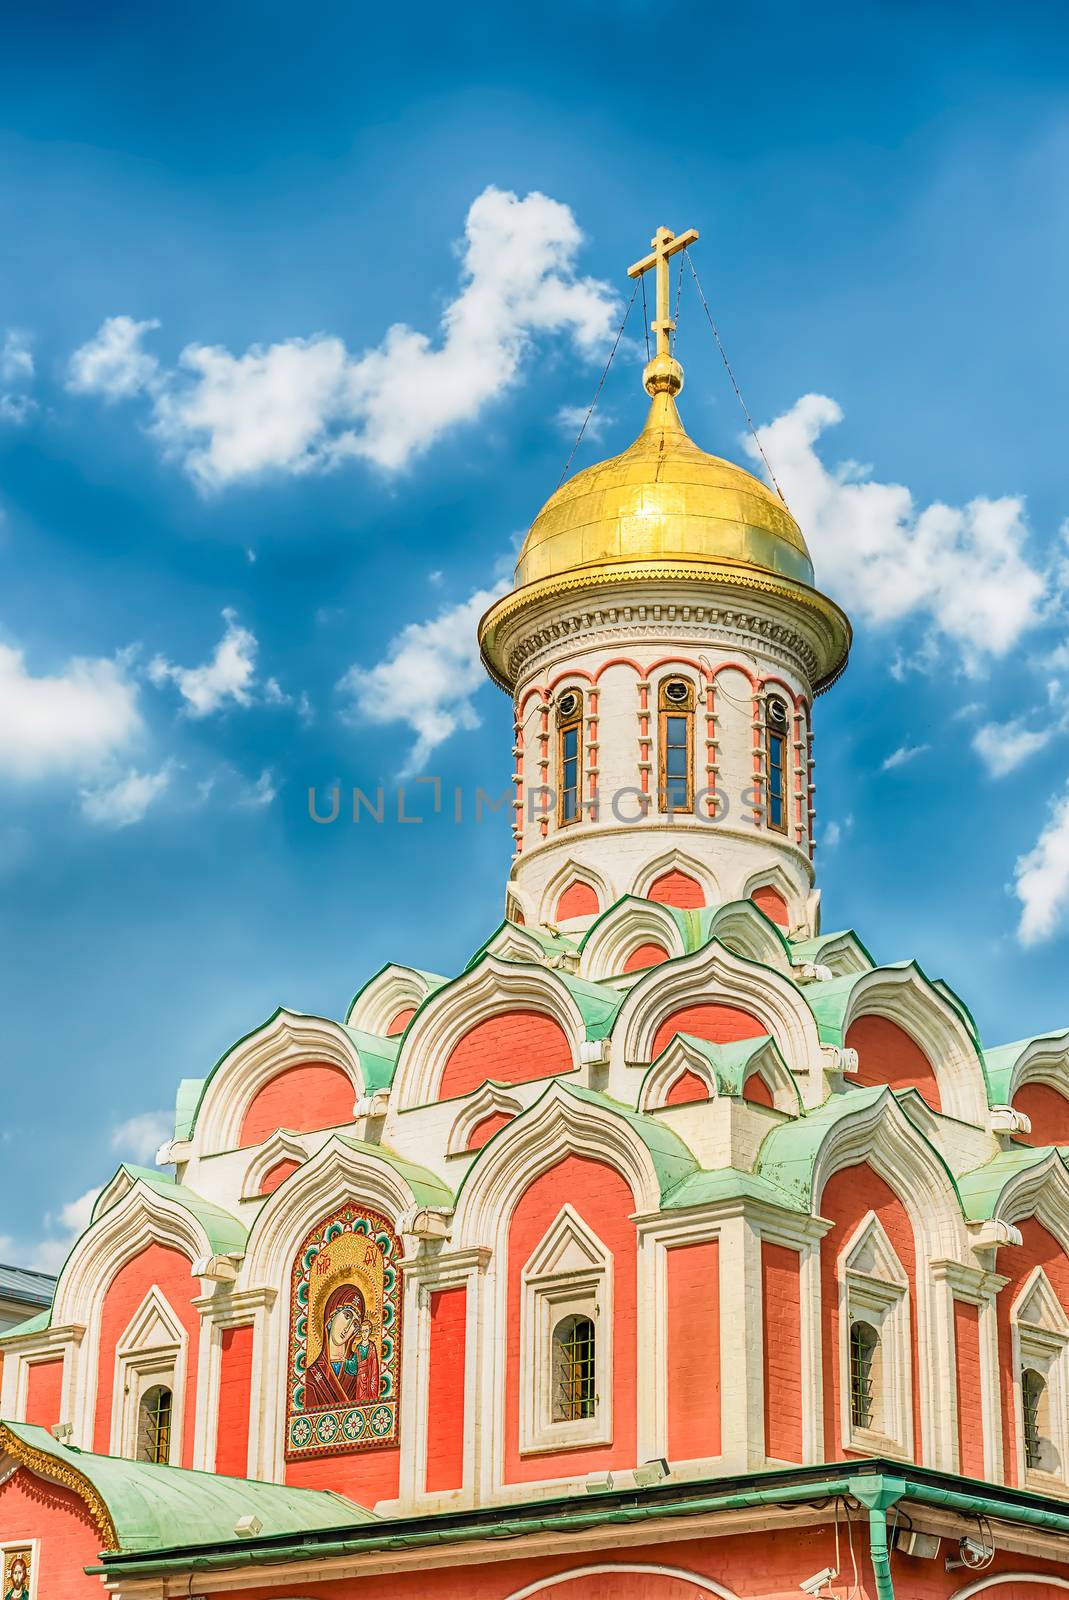 The russian orthodox Kazan Cathedral, iconic landmark in Red Square, Moscow, Russia